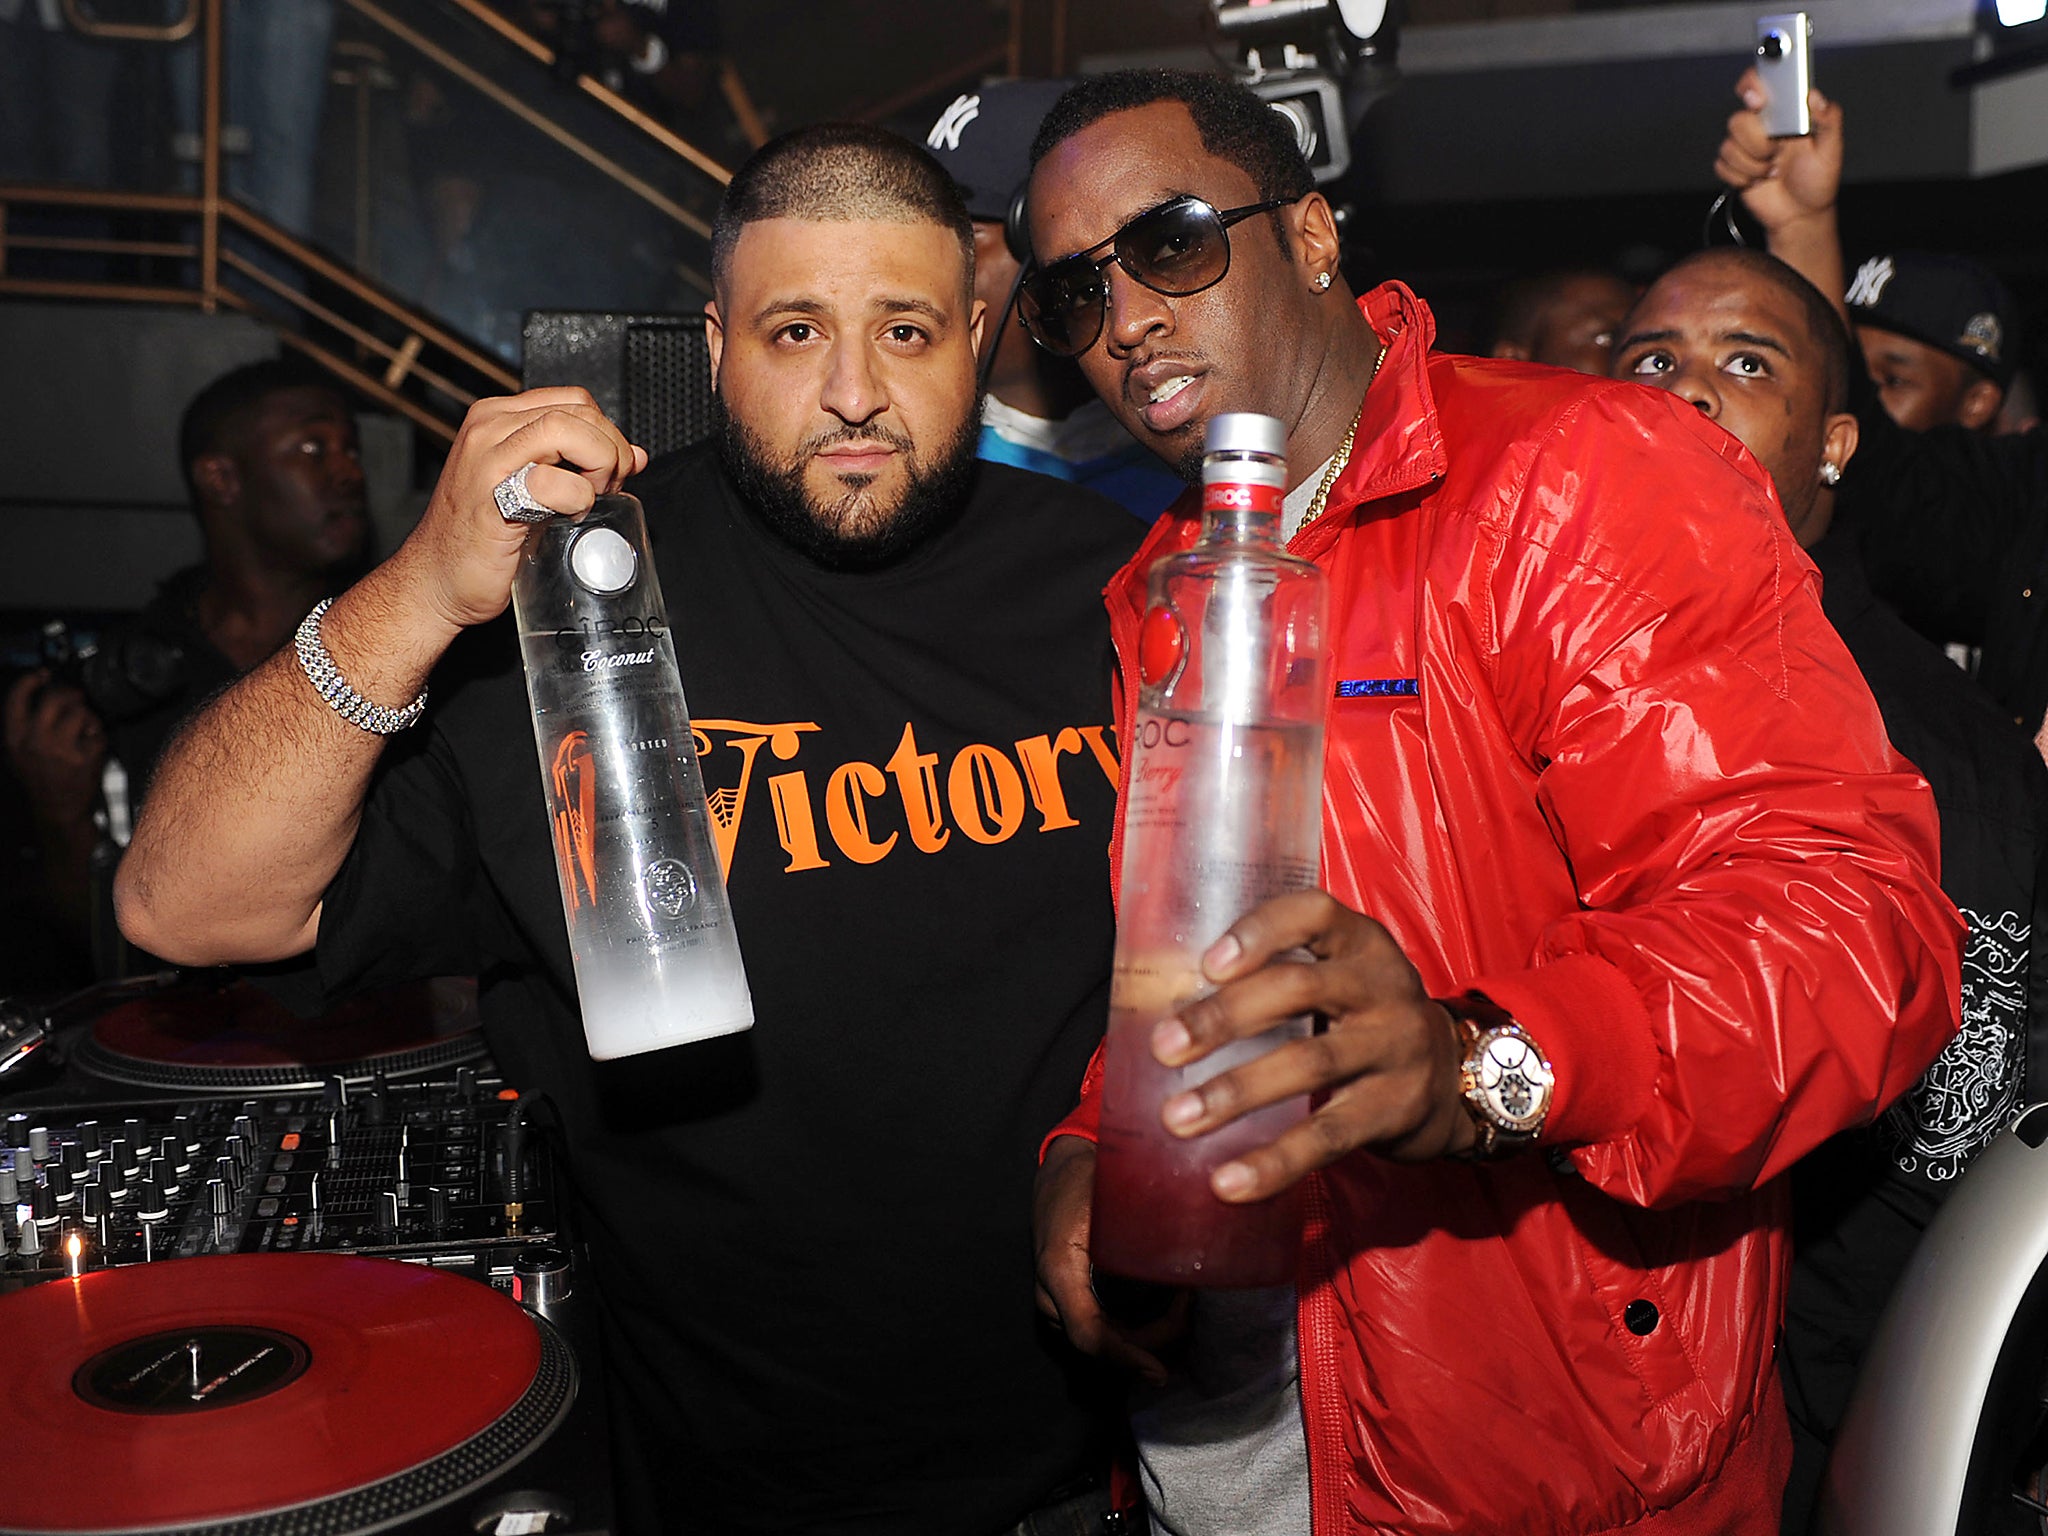 DJ Khaled and Sean 'Diddy' Combs pose with bottles of Ciroc vodka